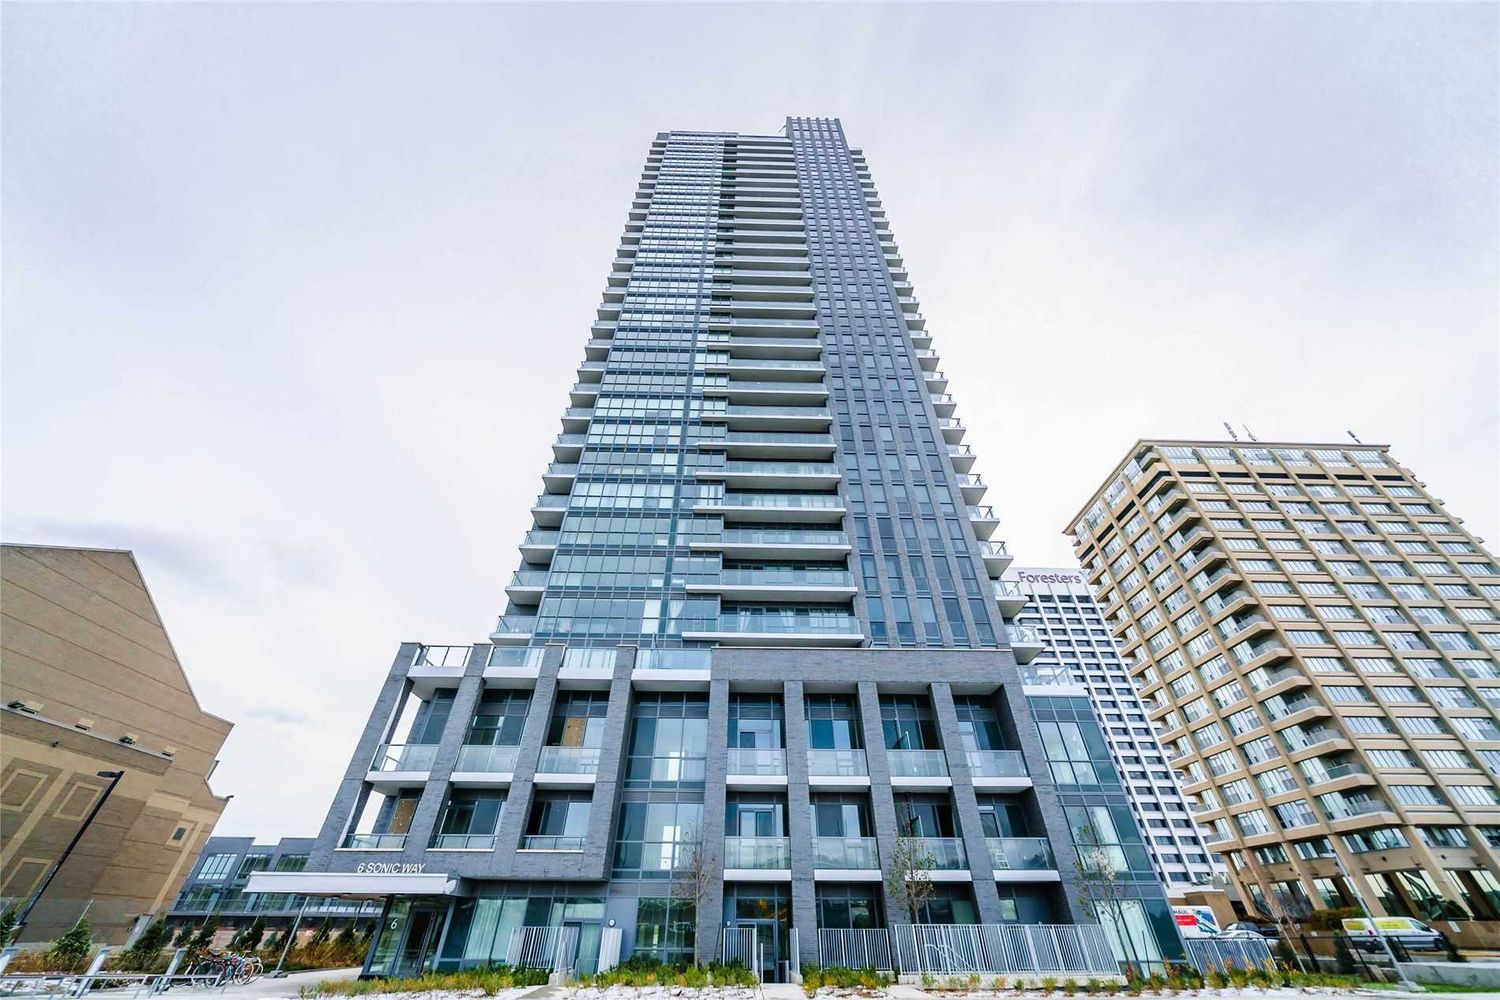 2-32 Sonic Way. Sonic and Super Sonic Condos  is located in  North York, Toronto - image #2 of 2